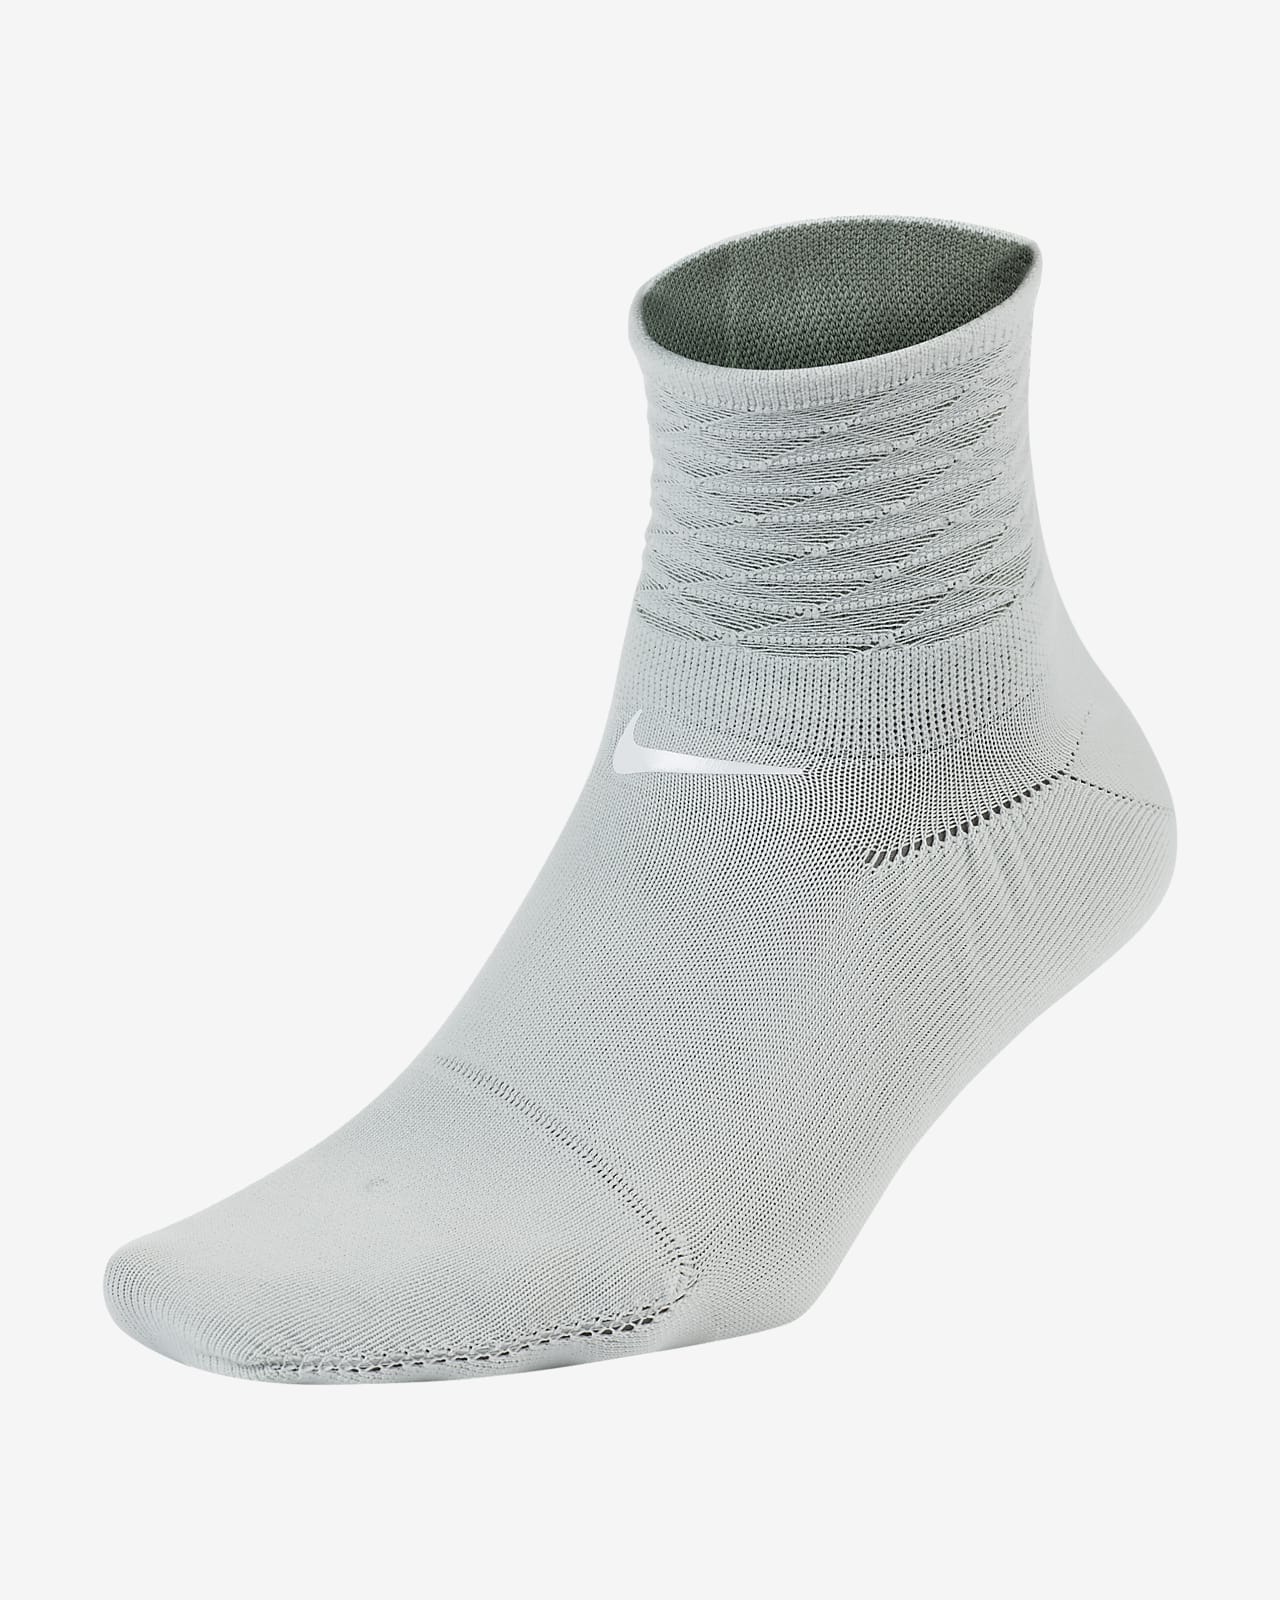 nike shoes with ankle sock